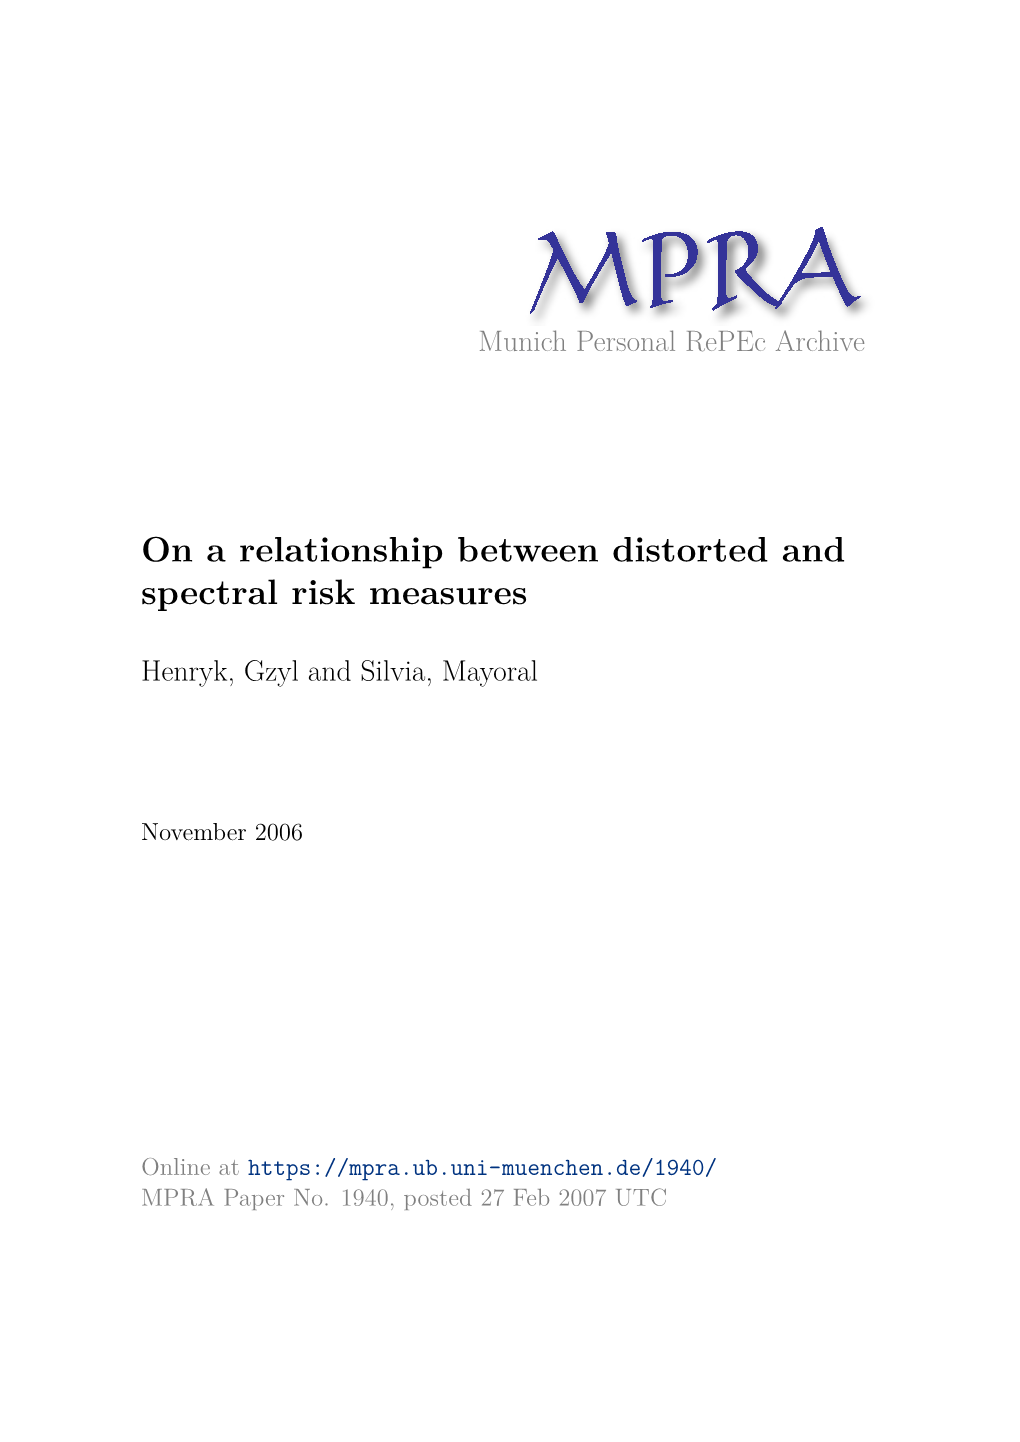 On a Relationship Between Distorted and Spectral Risk Measures